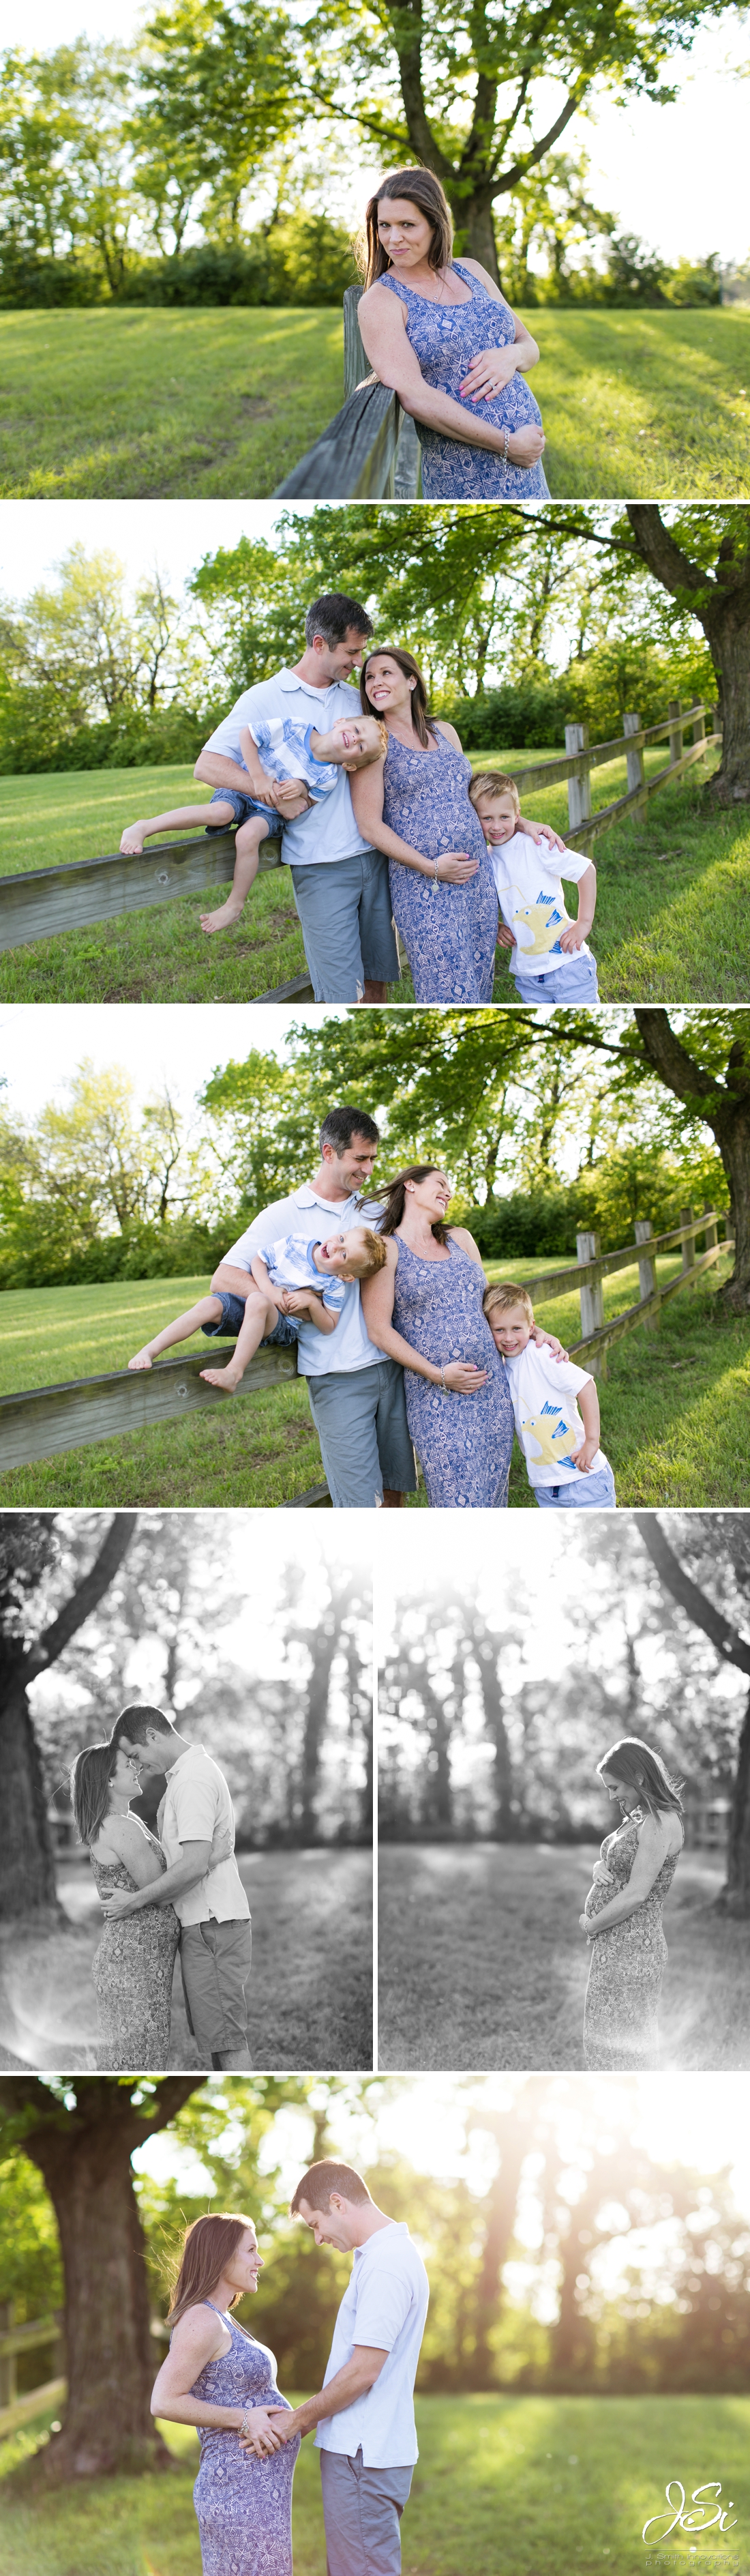 Kansas City Shawnee Mission Park happy playful family maternity photo session picture